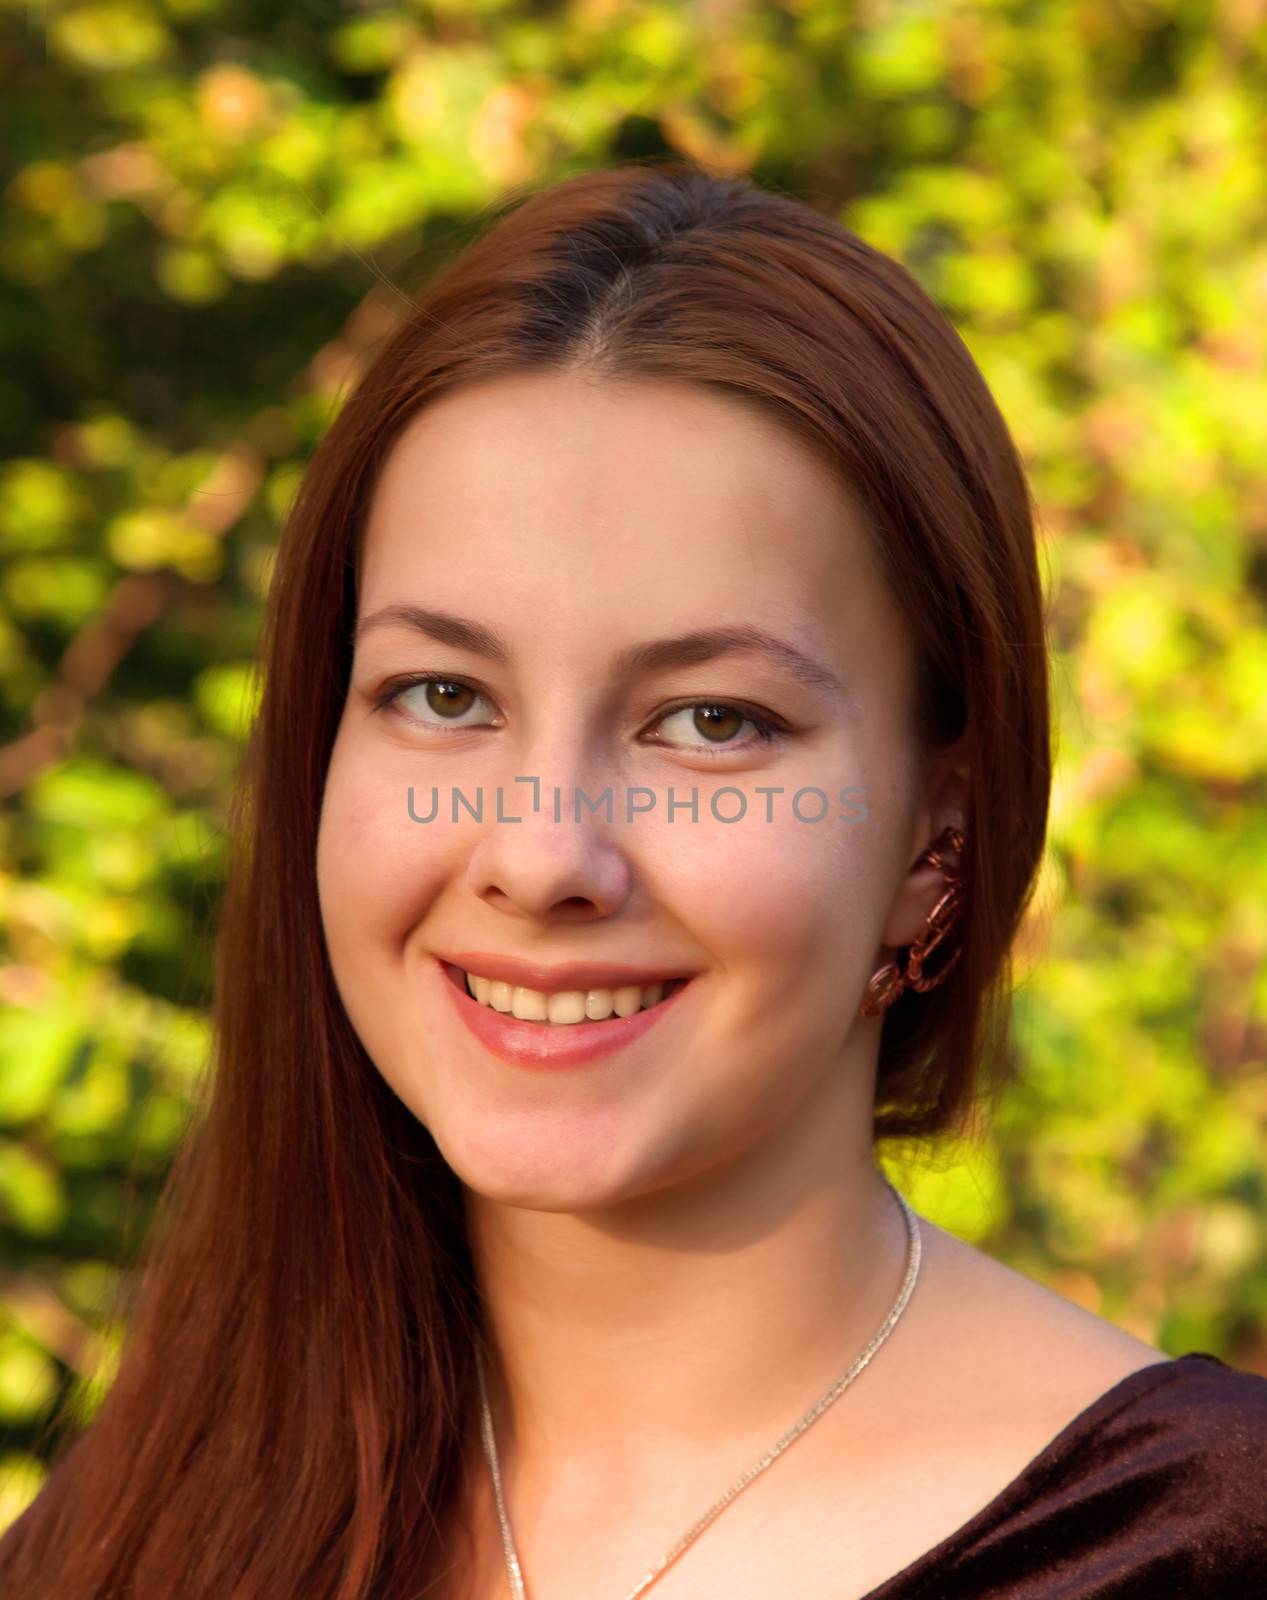 Young happy girl on a background of green foliage. Portrait